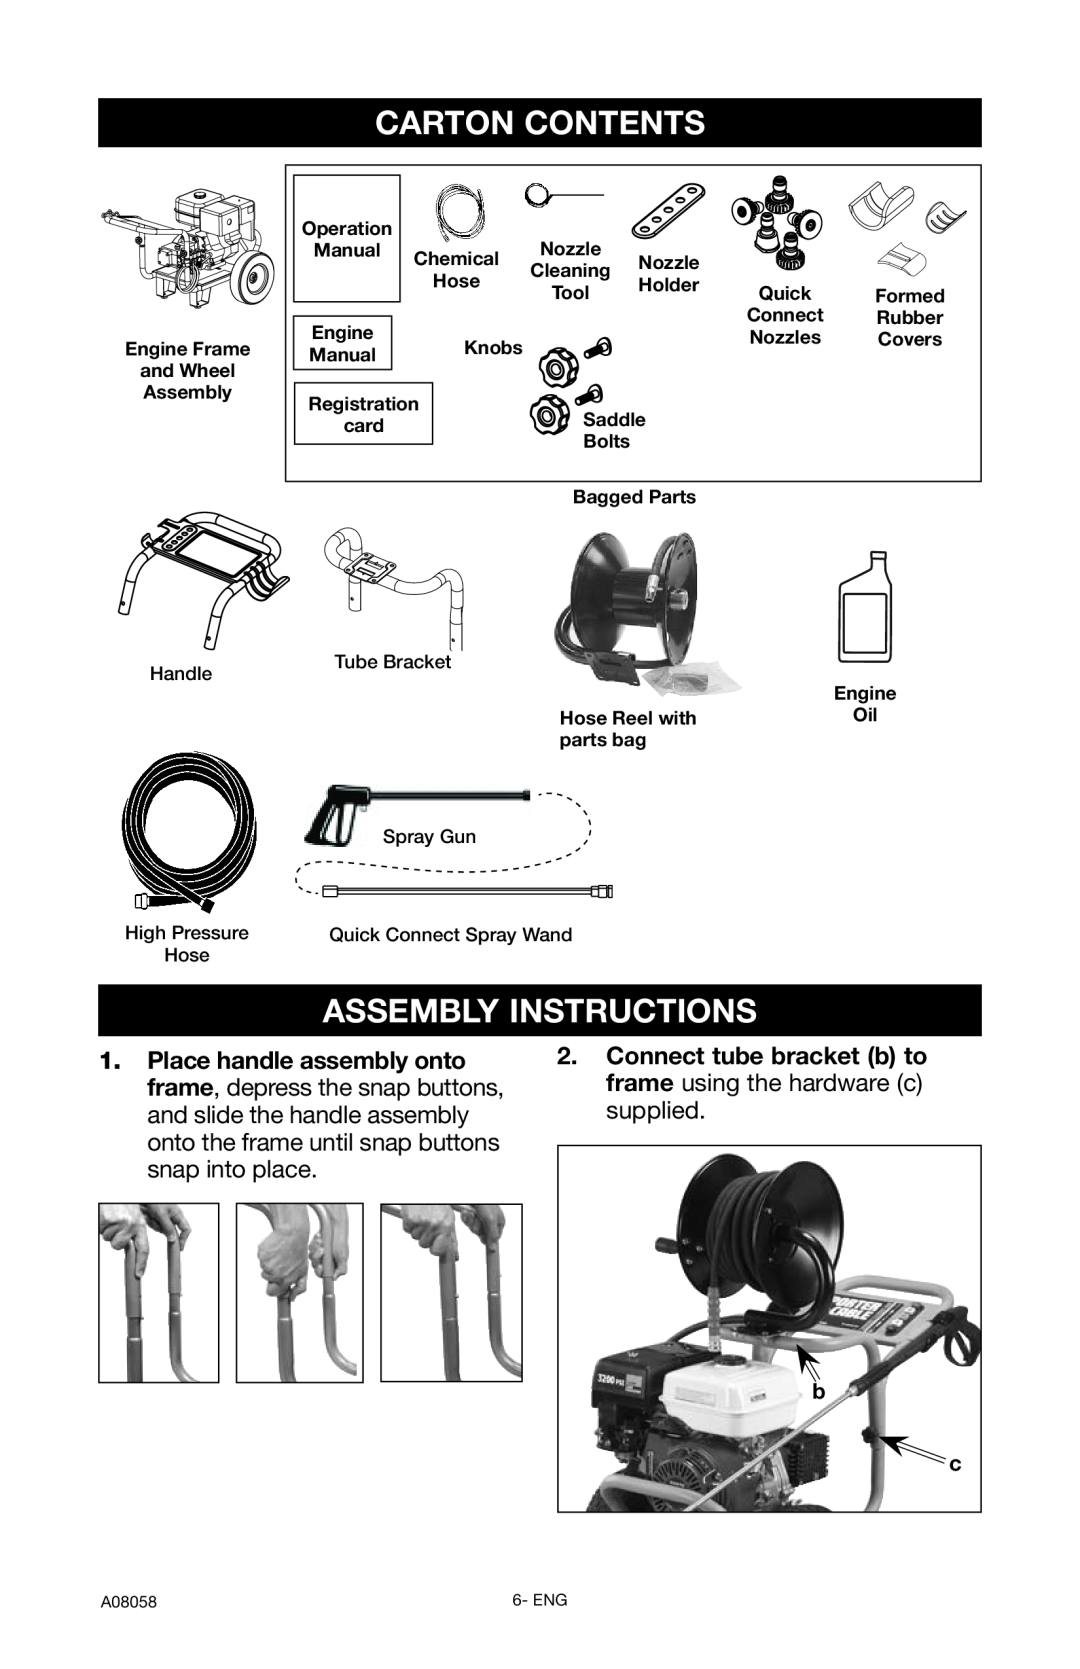 Porter-Cable PCH3740, A08058-0412-0 instruction manual Carton Contents, Assembly Instructions 